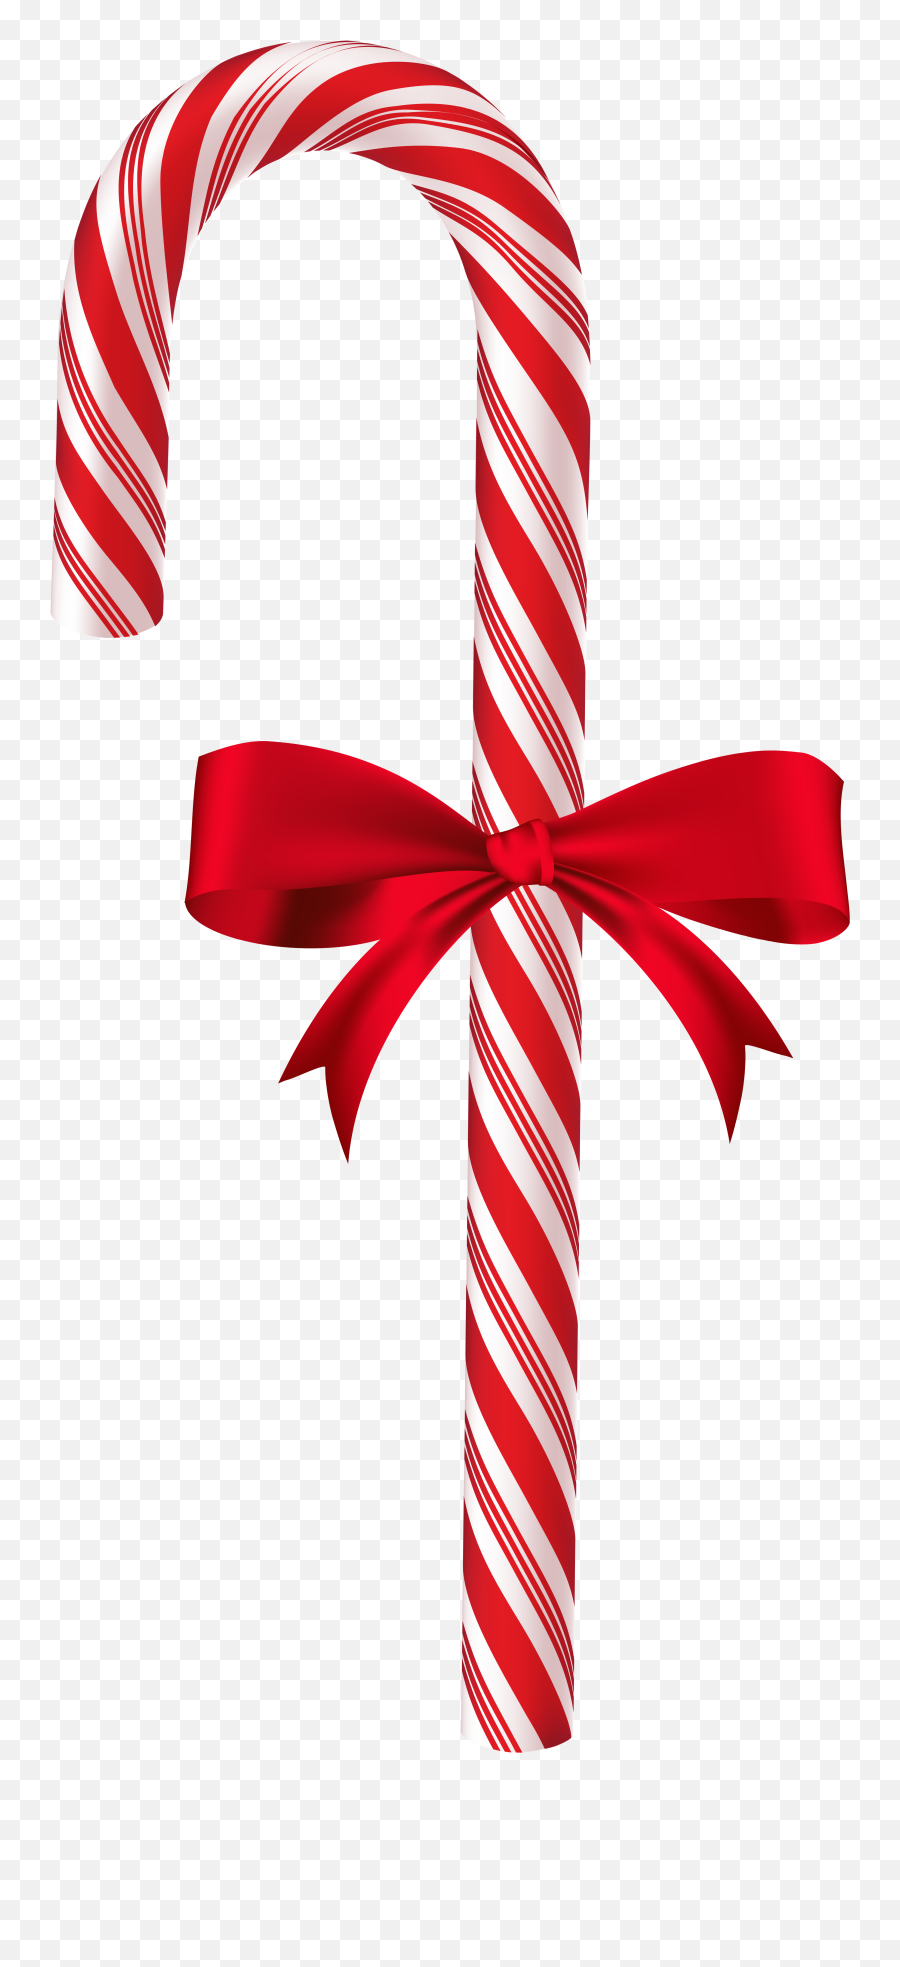 Candy Cane Background Download Free - Transparent Candy Cane Png,Candy Cane Transparent Background